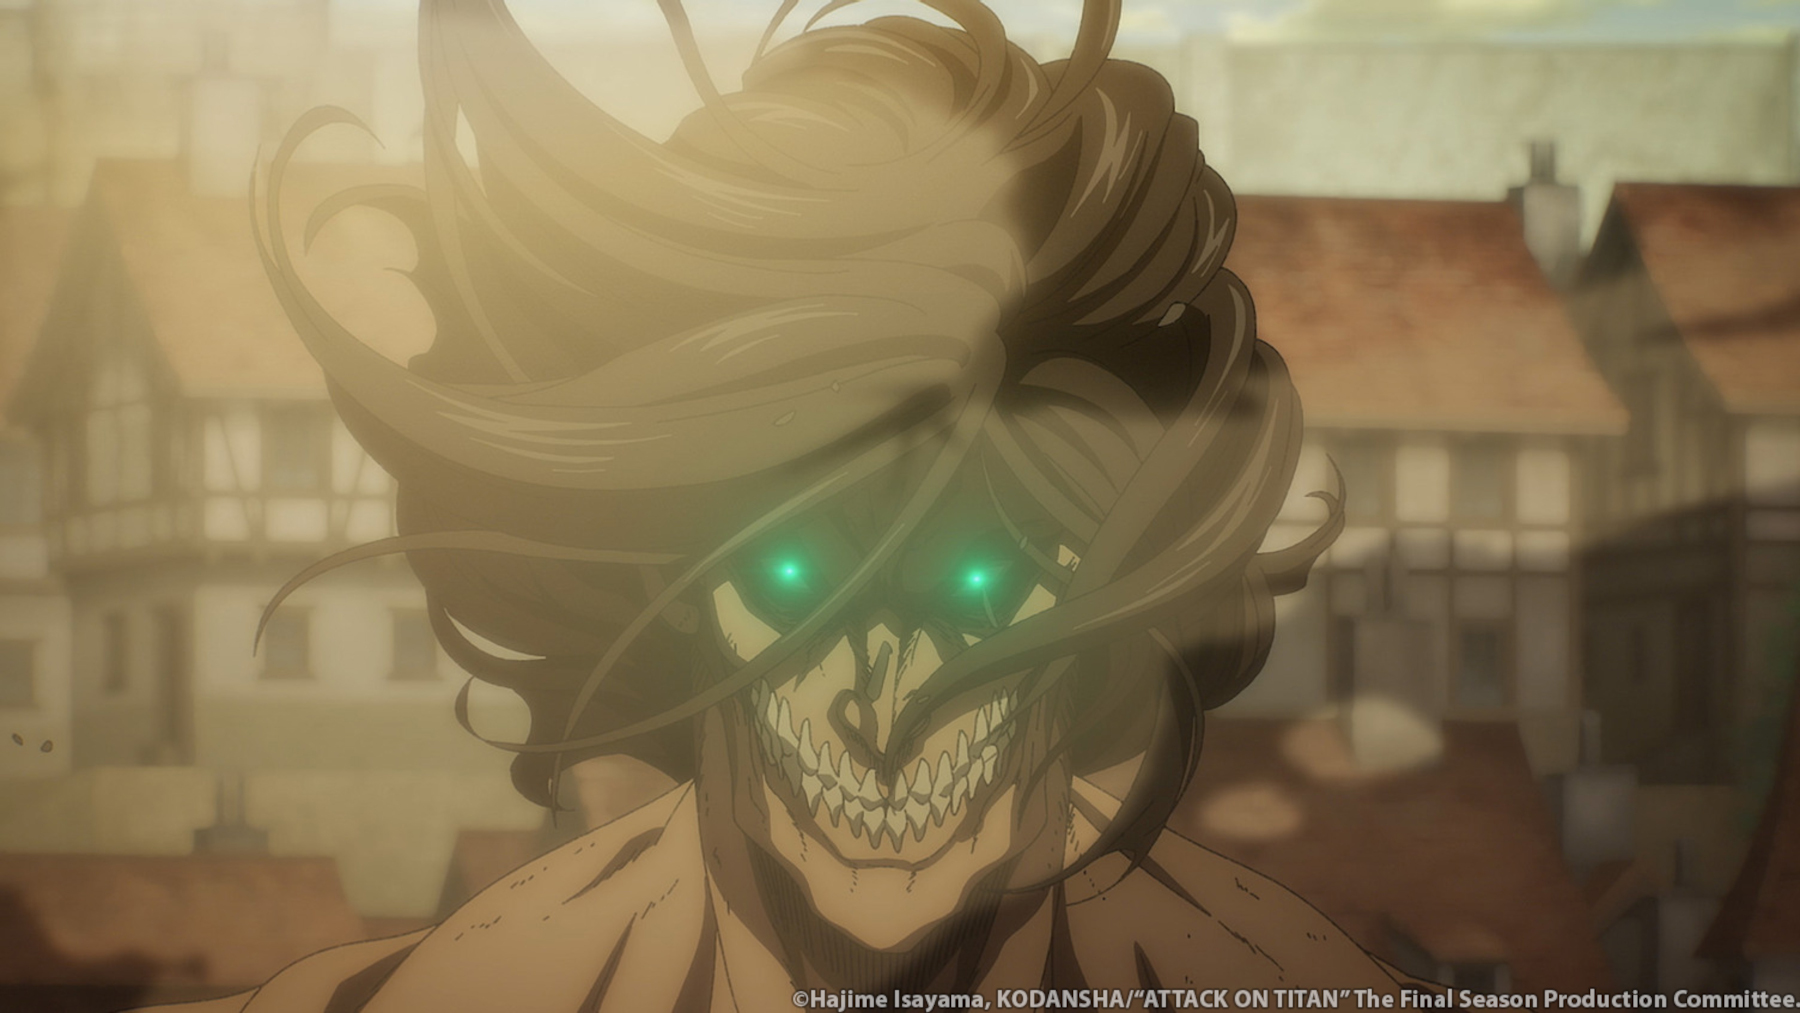 Eren Yeager in Titan form in 'Attack on Titan' Season 4 Part 2, which is nearing its finale. His eyes are green and glowing, and his hair is blowing in the wind.